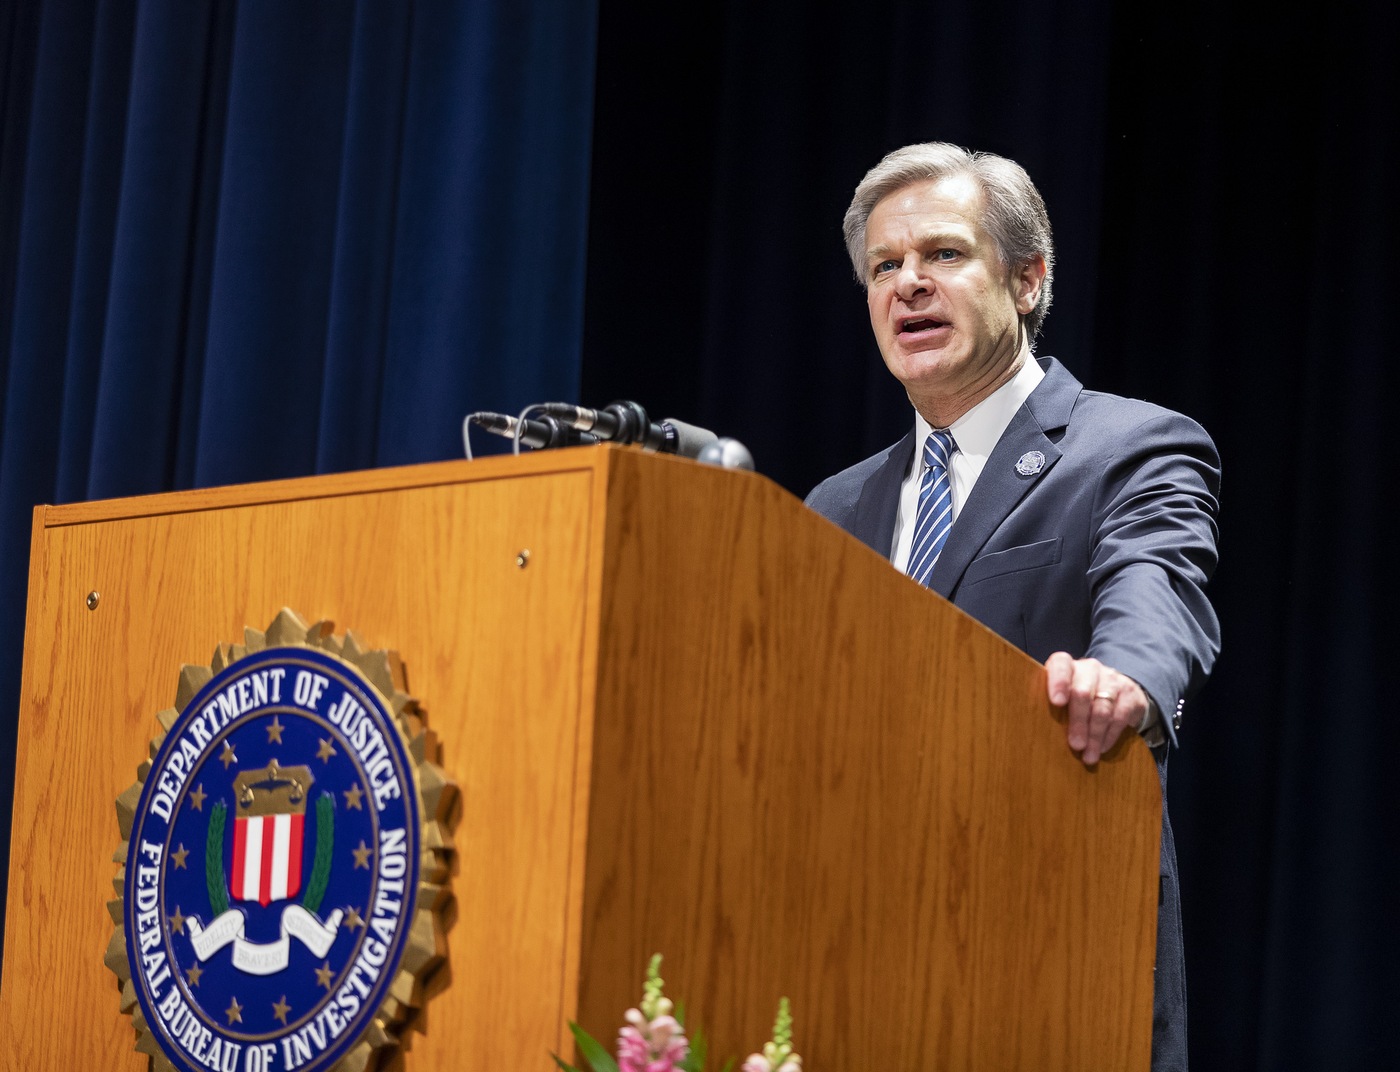 FBI Director Christopher Wray spoke at an event celebrating the 50th anniversary of the FBI's modern training facilities at Quantico. 